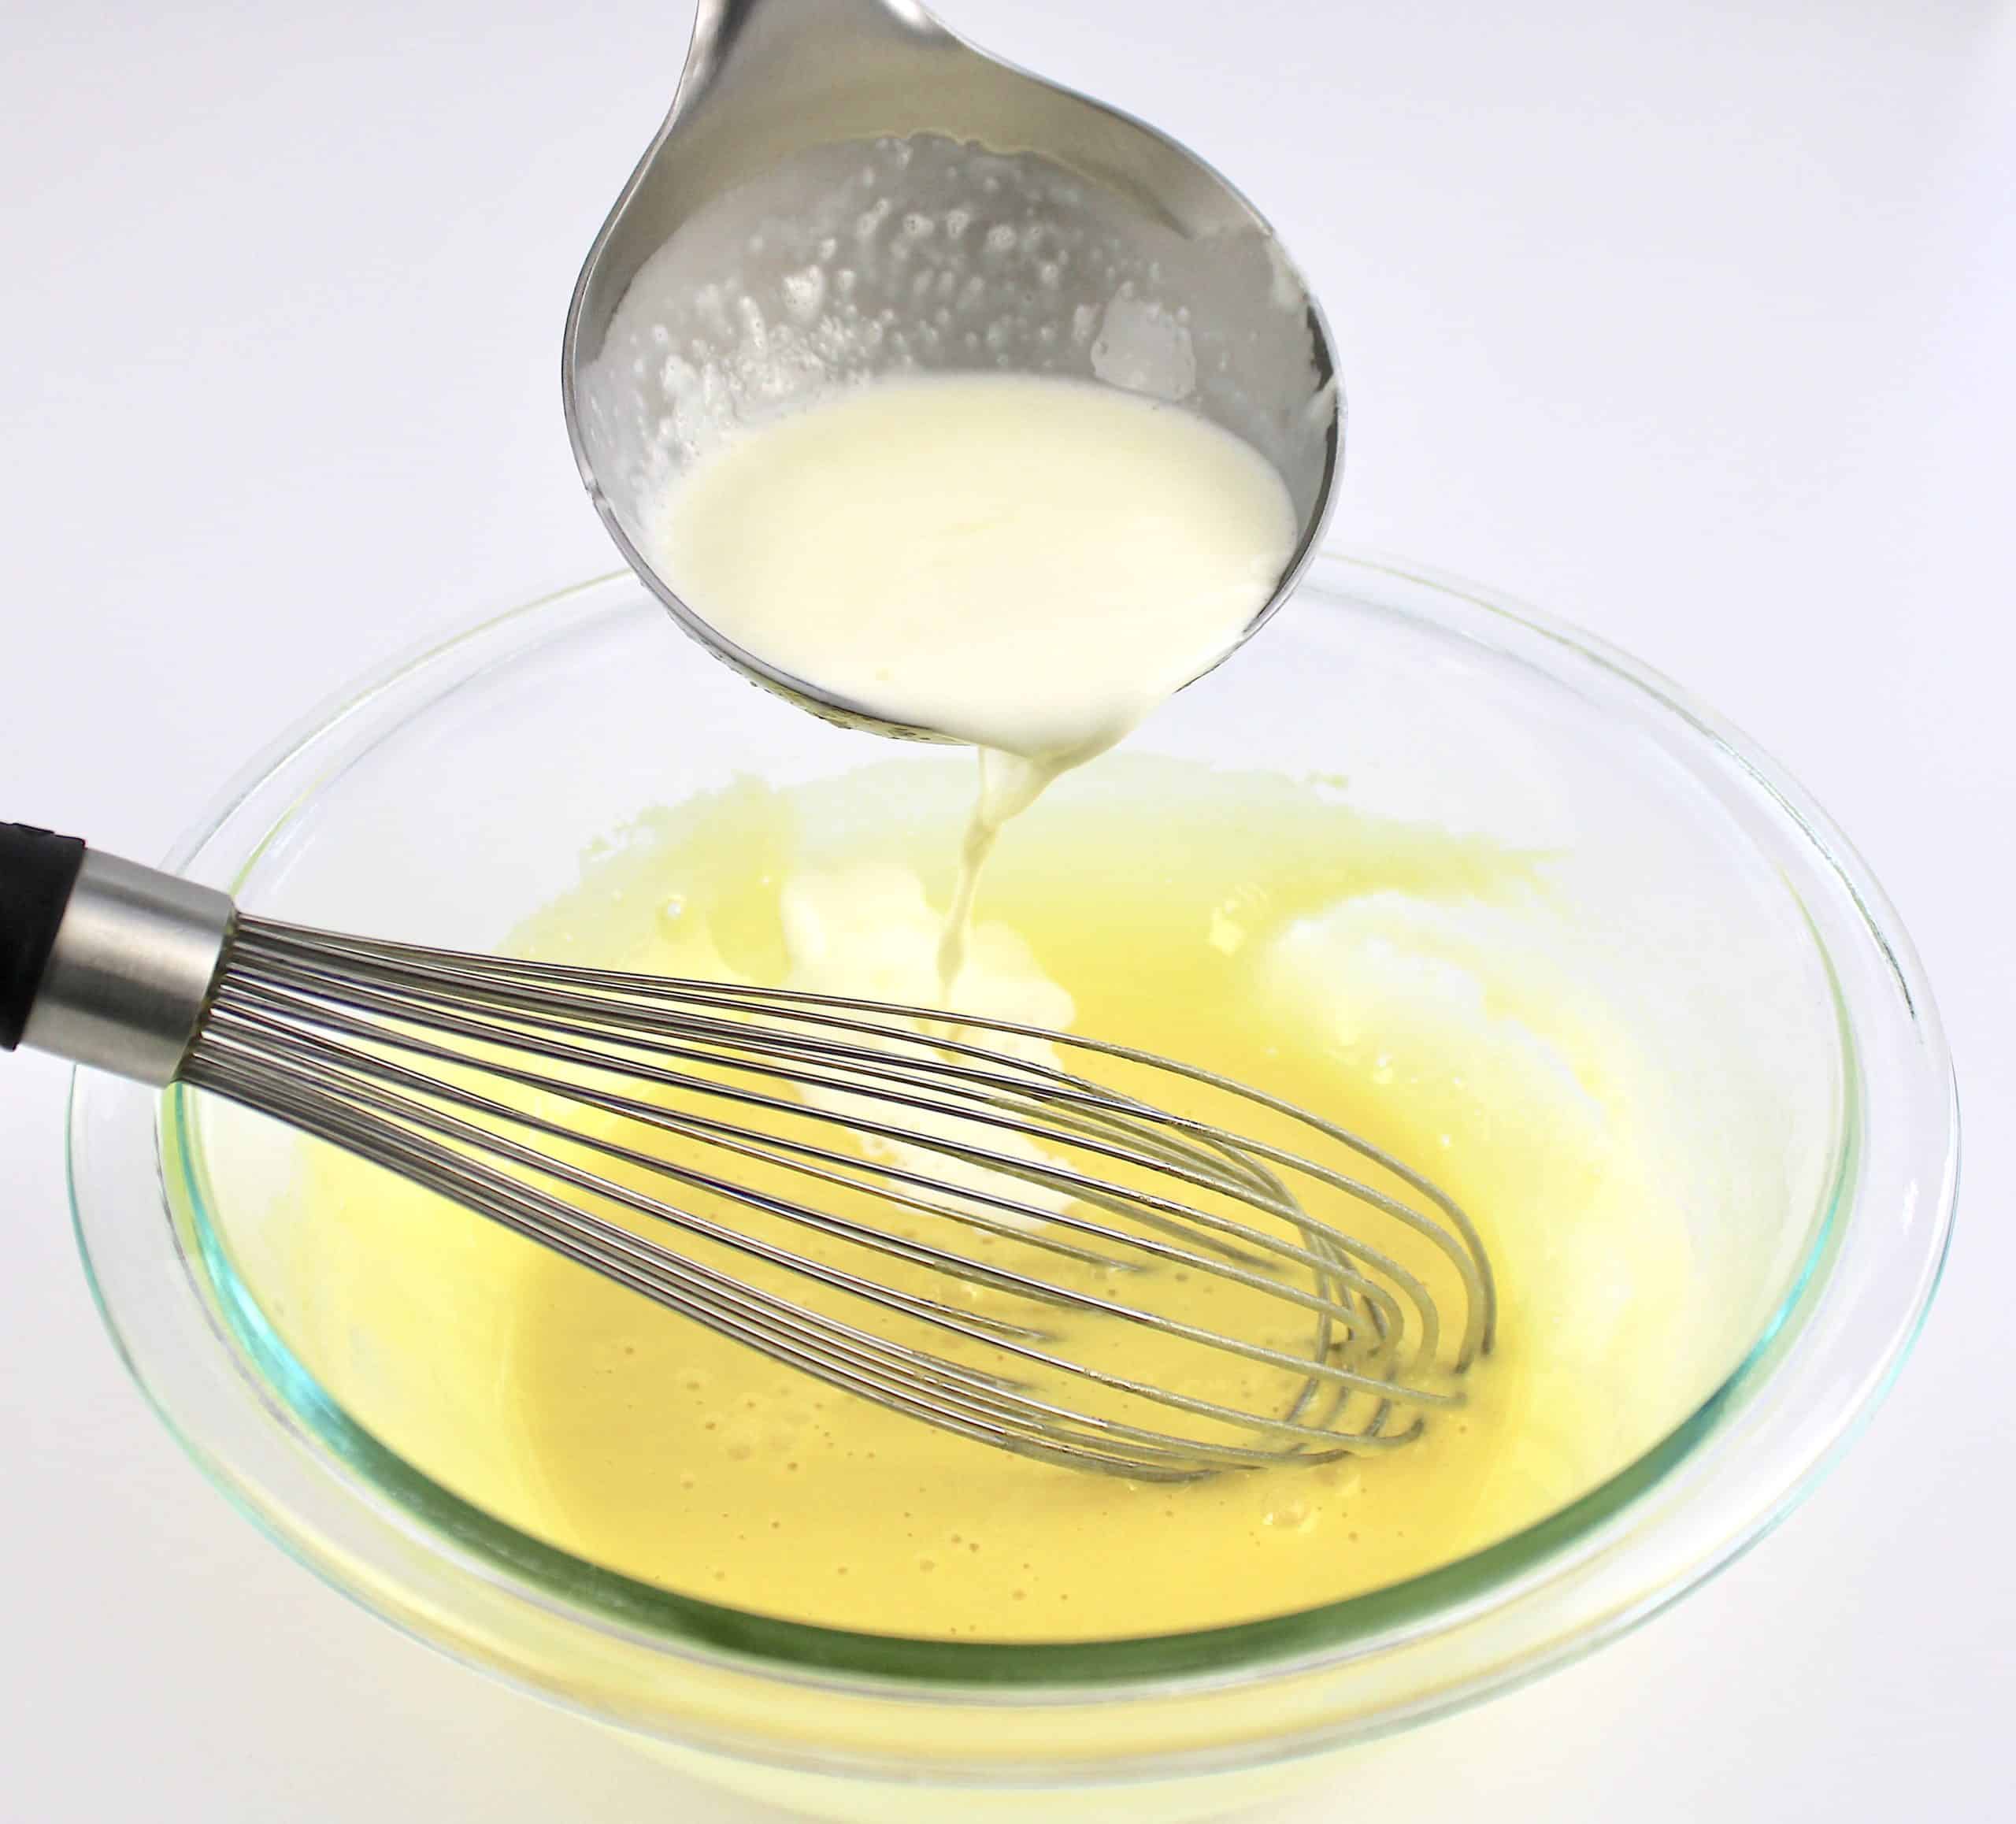 cream being ladled into egg mixture in glass bowl with whisk